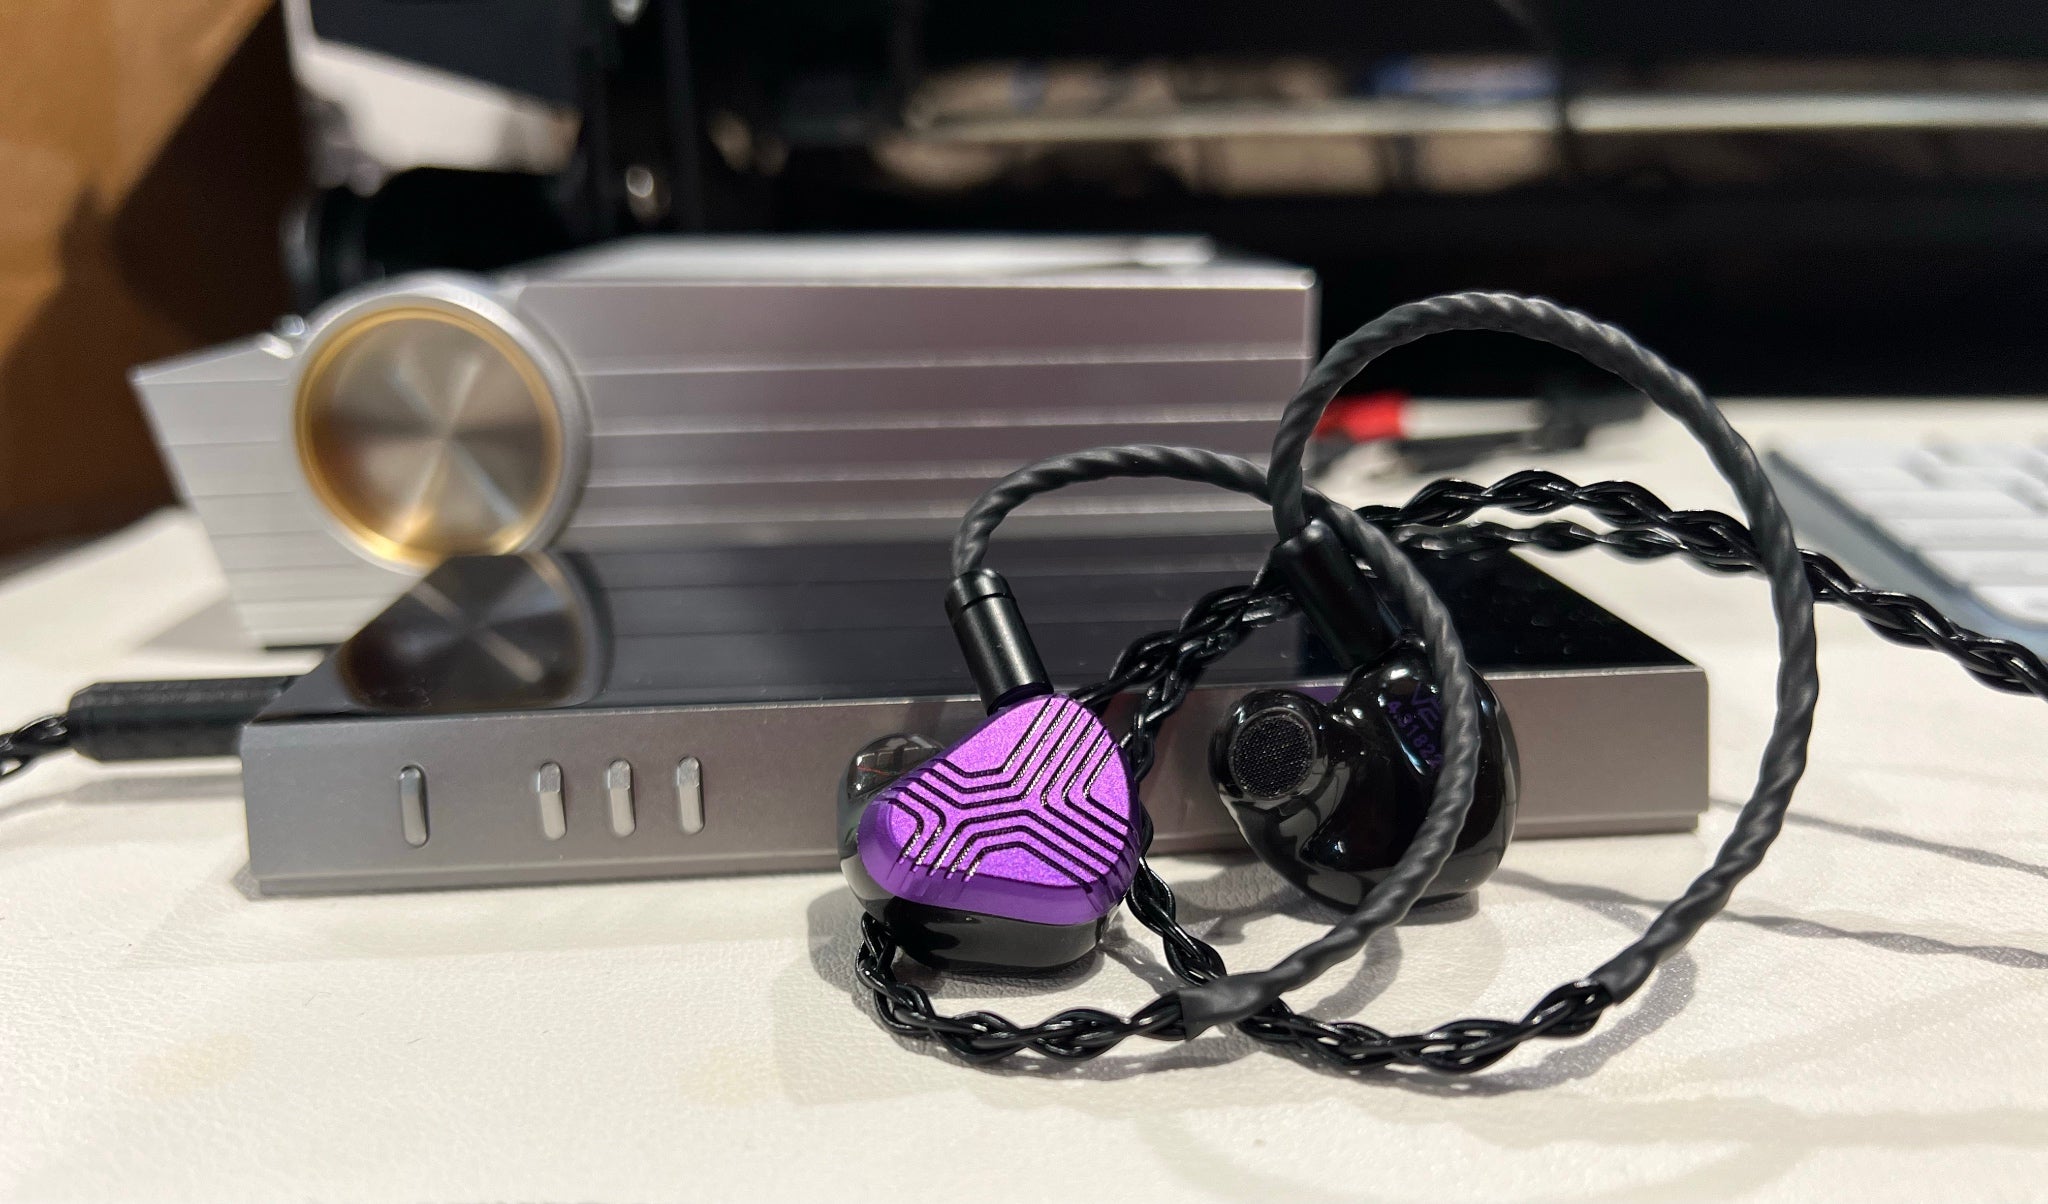 Vision Ears EXT earphones with Astell&Kern audio player from Bloom Audio gallery